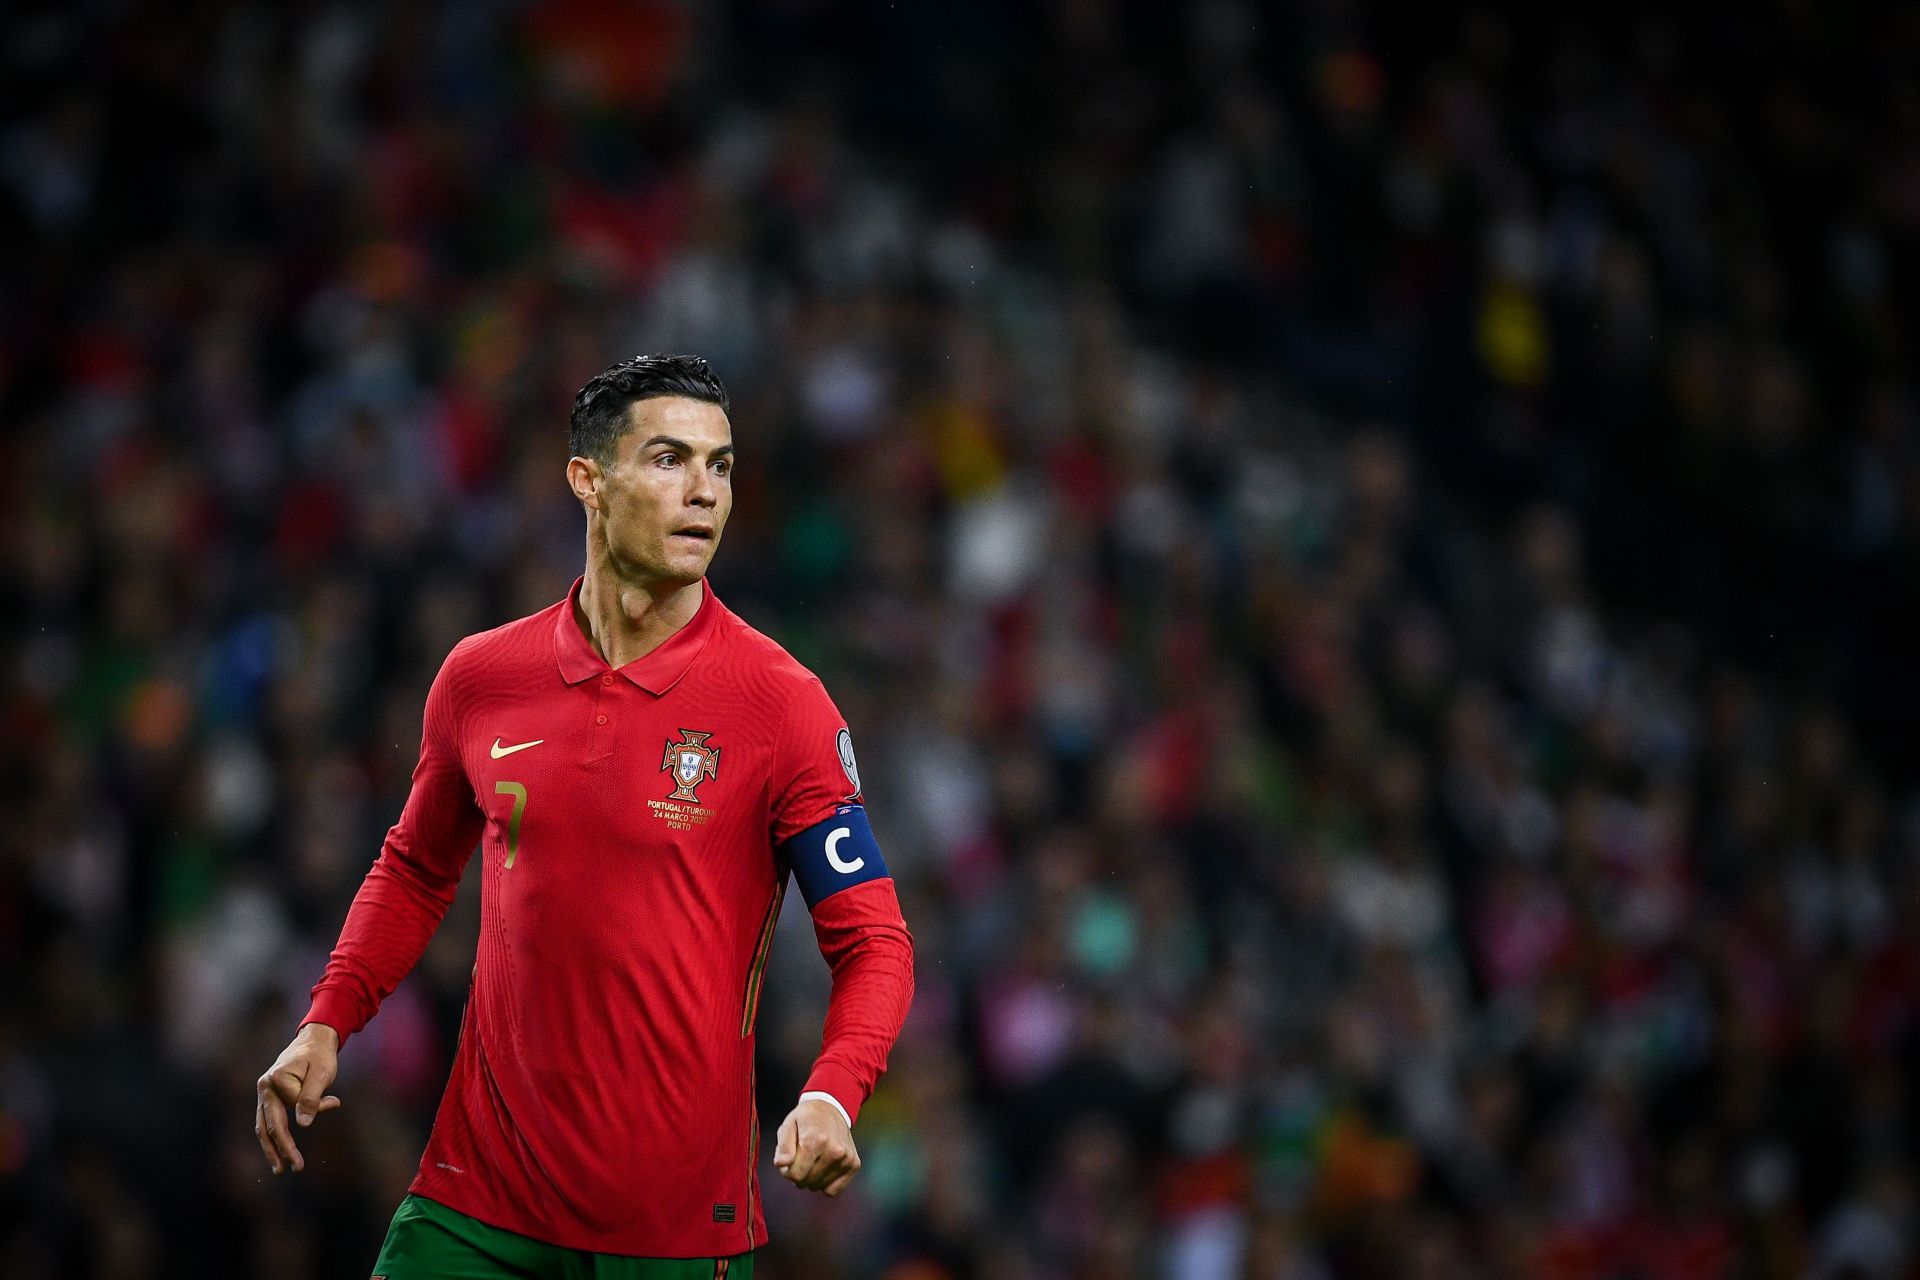 Cristiano Ronaldo and Portugal are set to face North Macedonia later on Tuesday night.